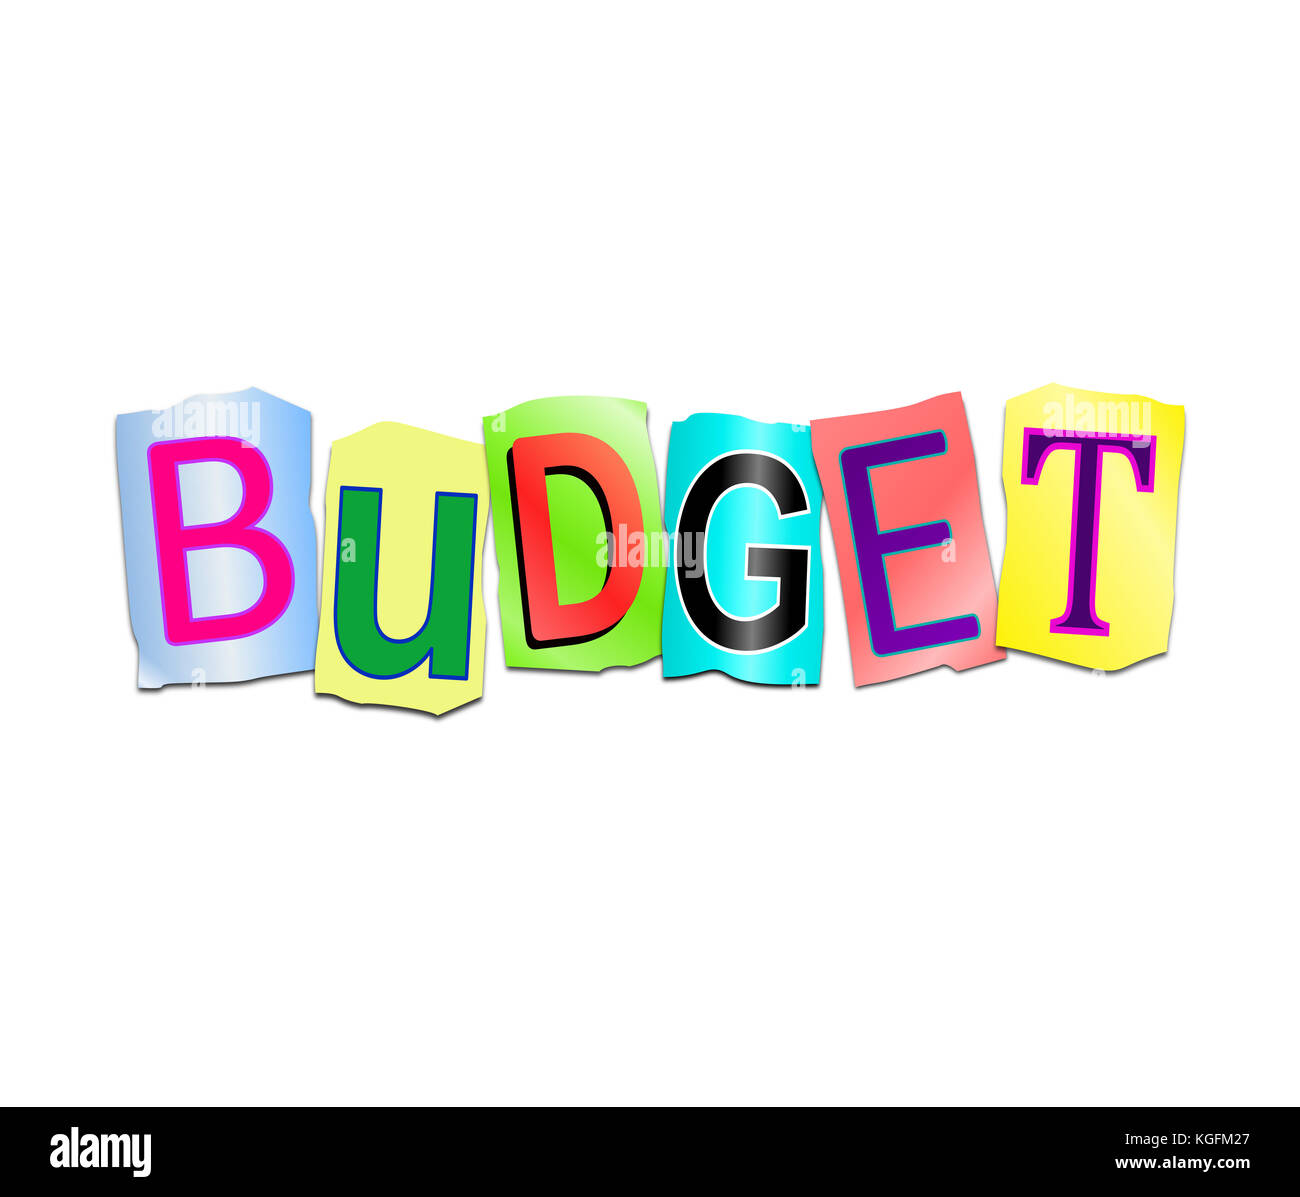 Illustration depicting a set of cut out printed letters arranged to form the word budget. Stock Photo